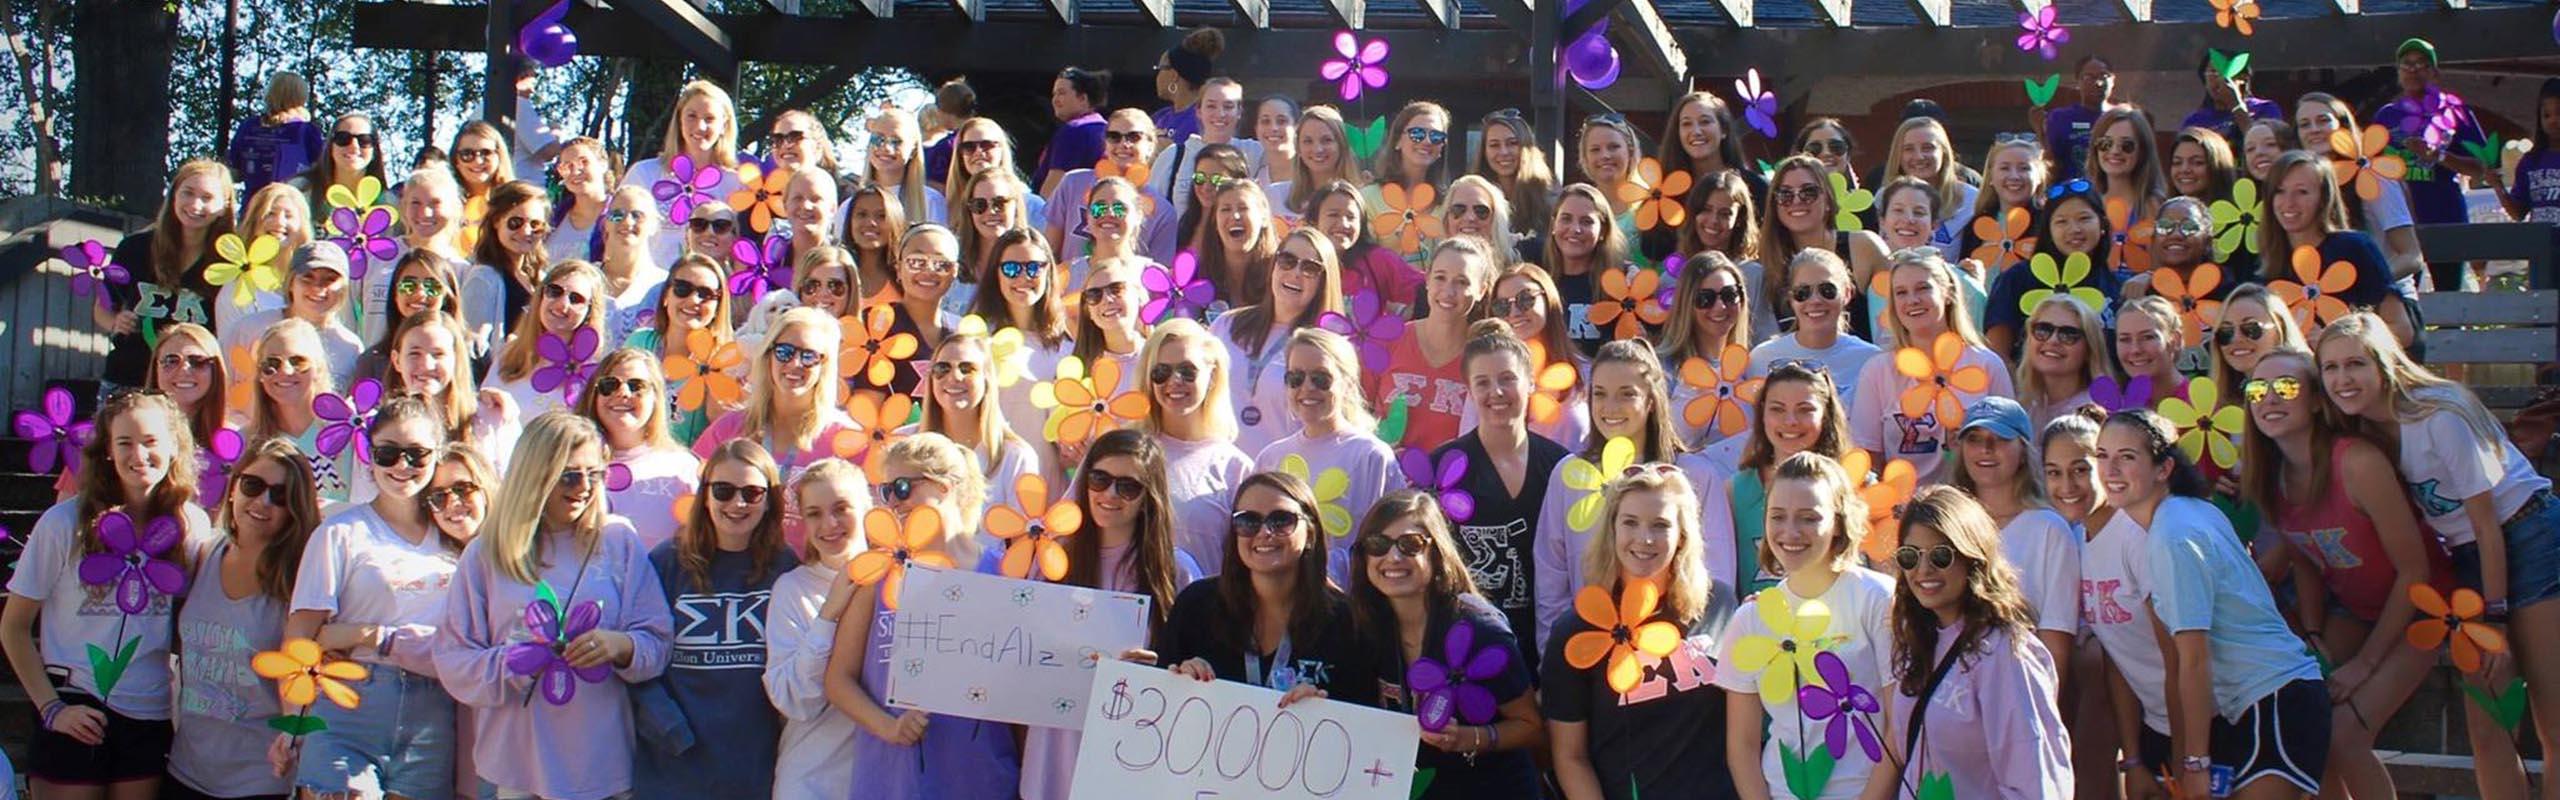 Elon University’s Sigma Kappa chapter raised more than $30,000 at the Walk to End Alzheimer’s in Burlington.